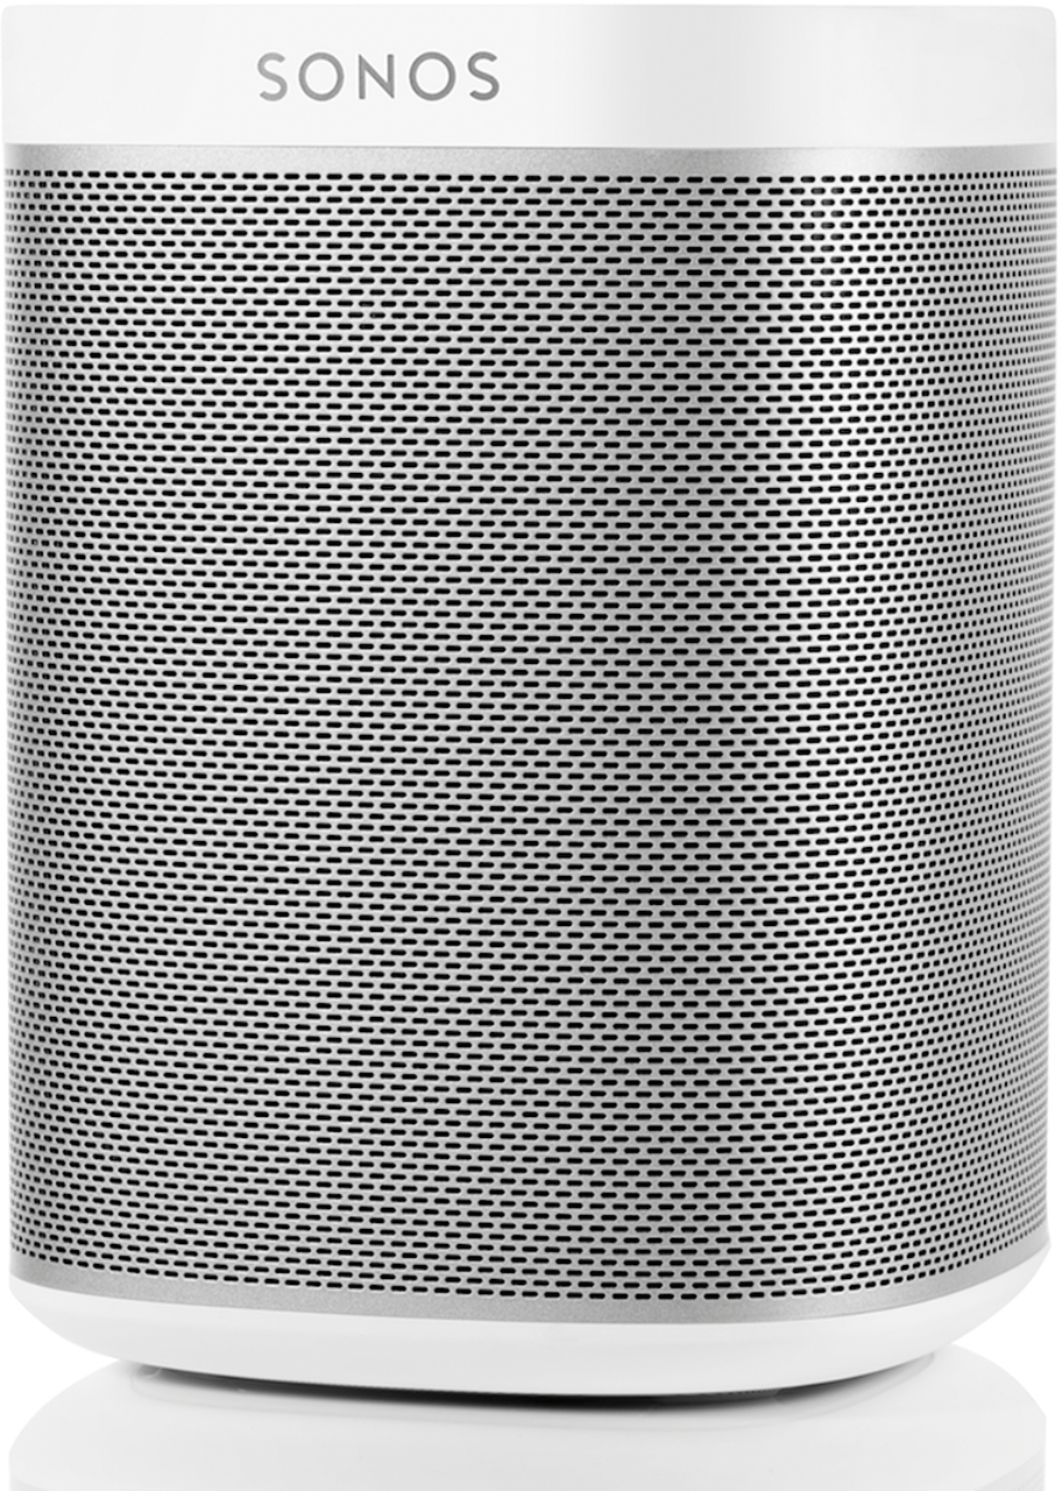 Left View: Sonos - Geek Squad Certified Refurbished PLAY:1 Wireless Speaker for Streaming Music - White